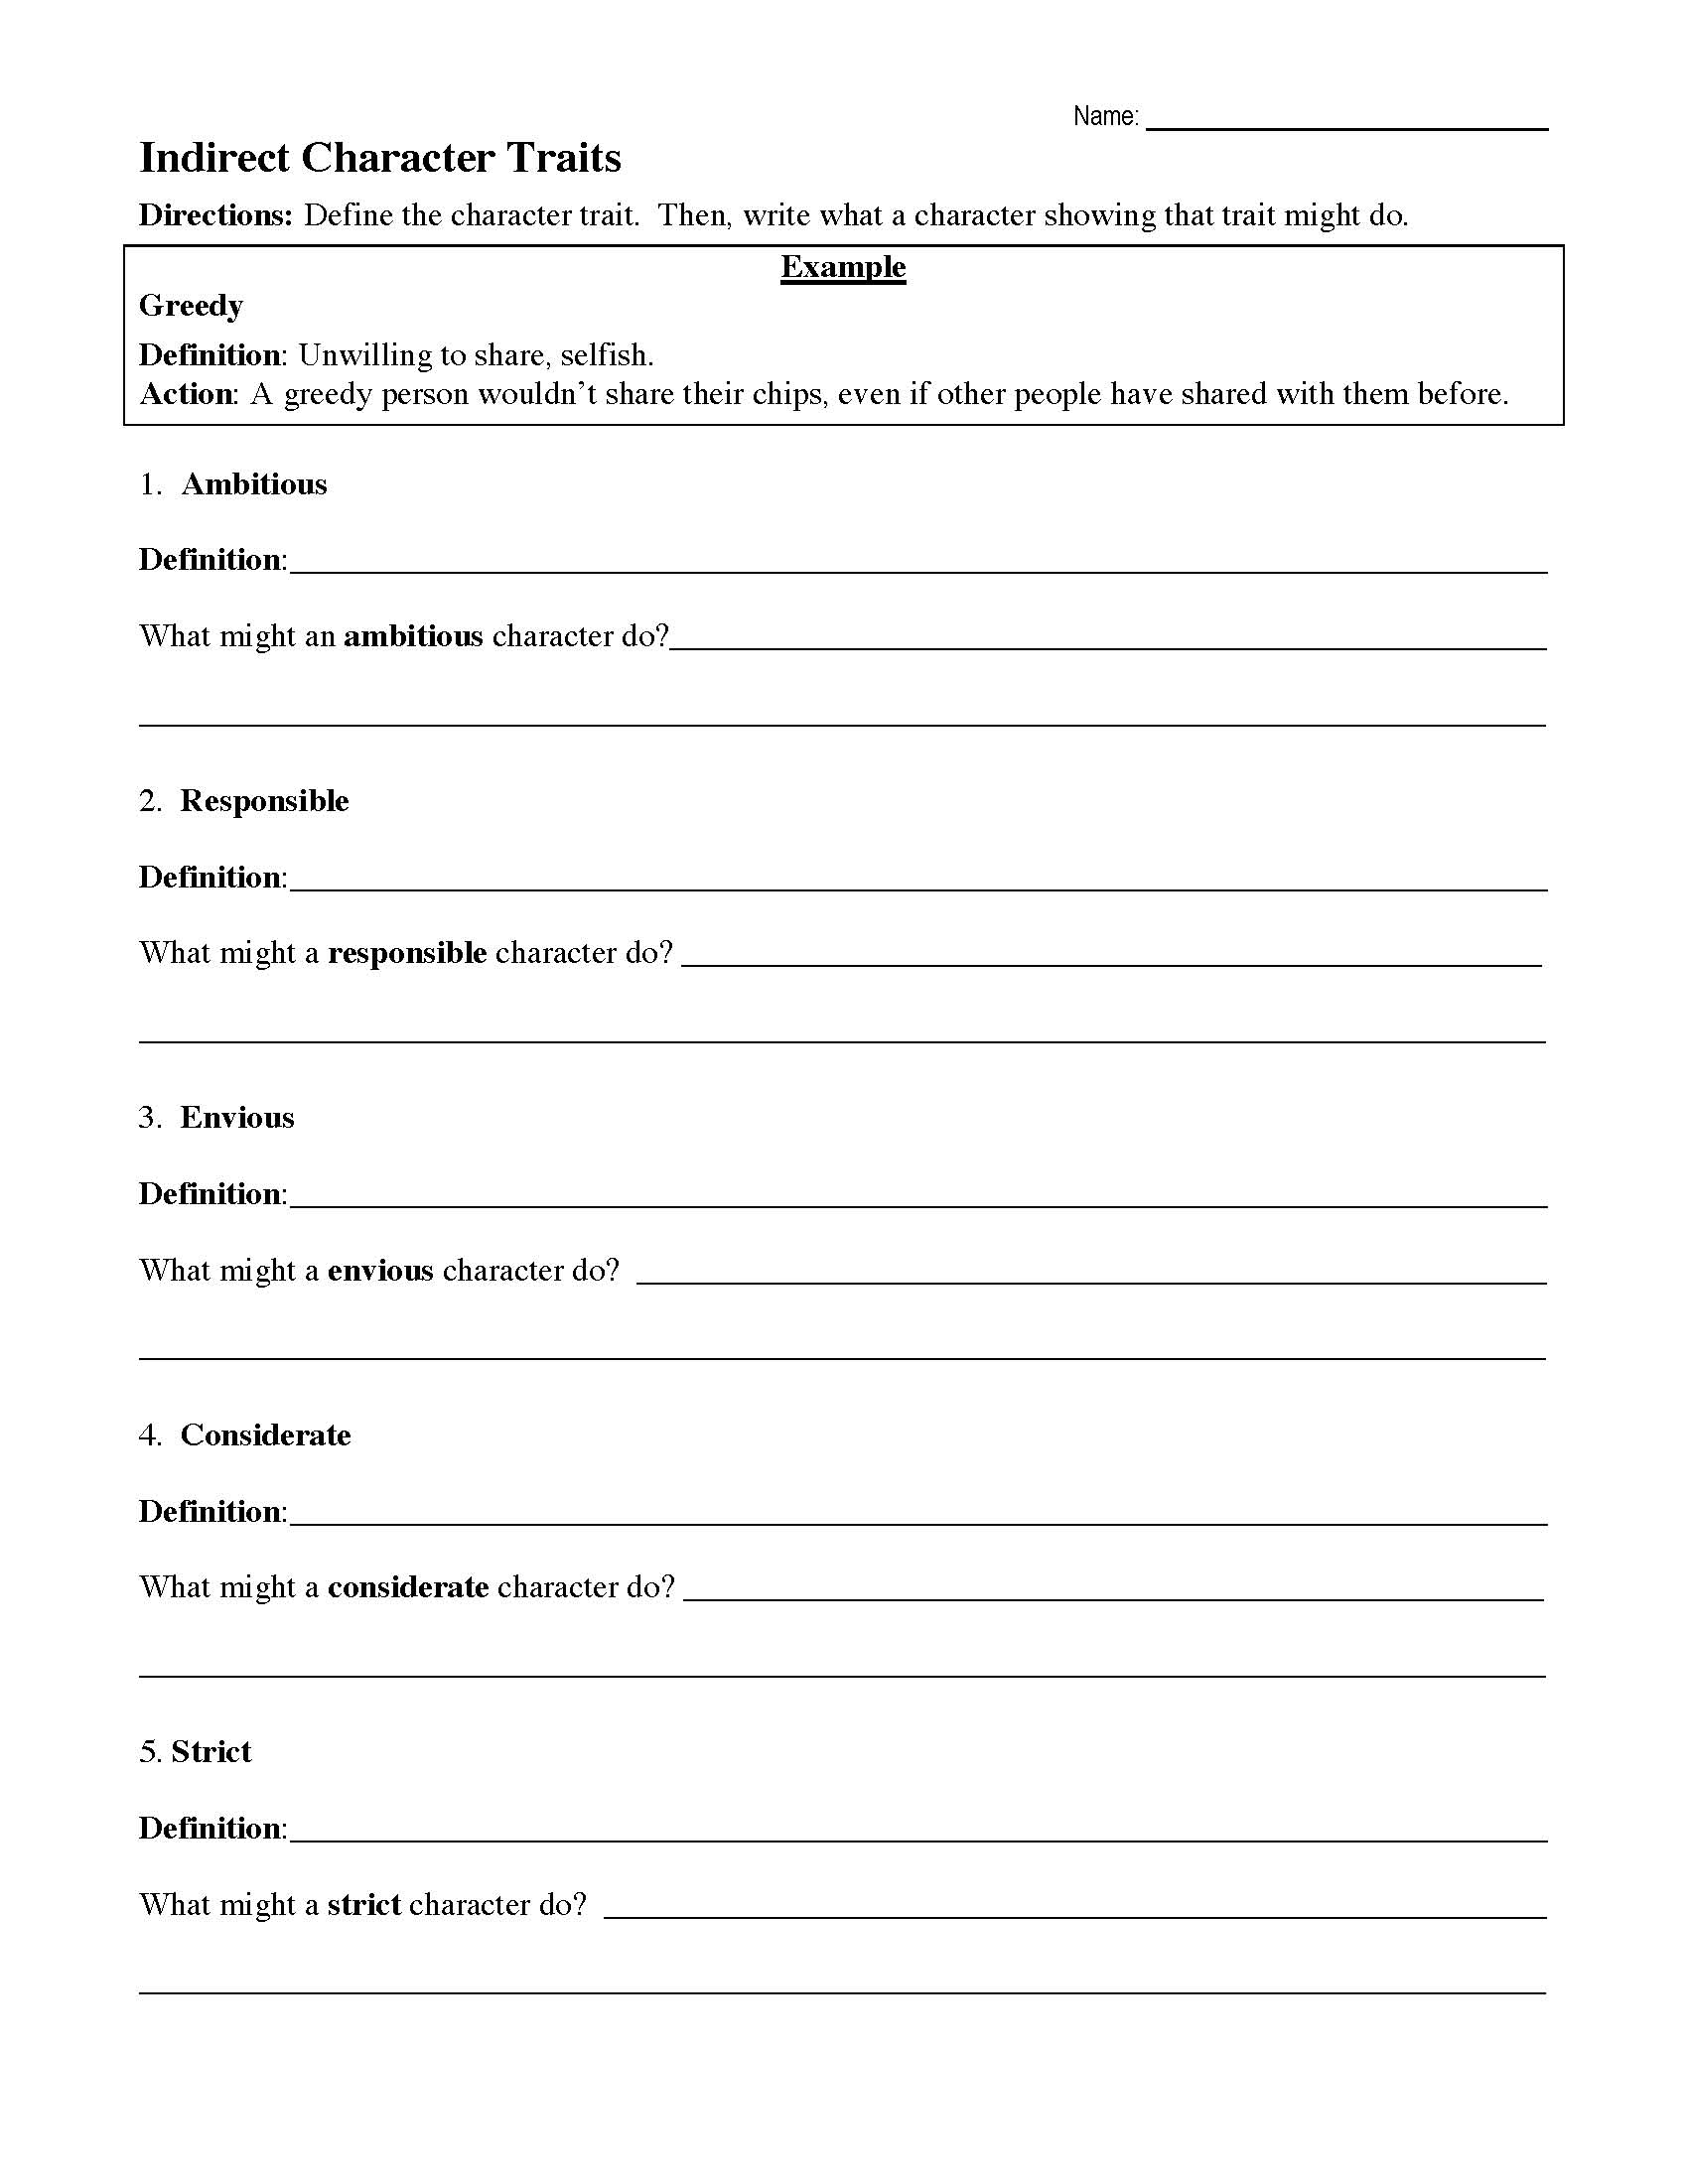 Indirect Characterizations Worksheet  Reading Activity With Regard To Direct And Indirect Characterization Worksheet